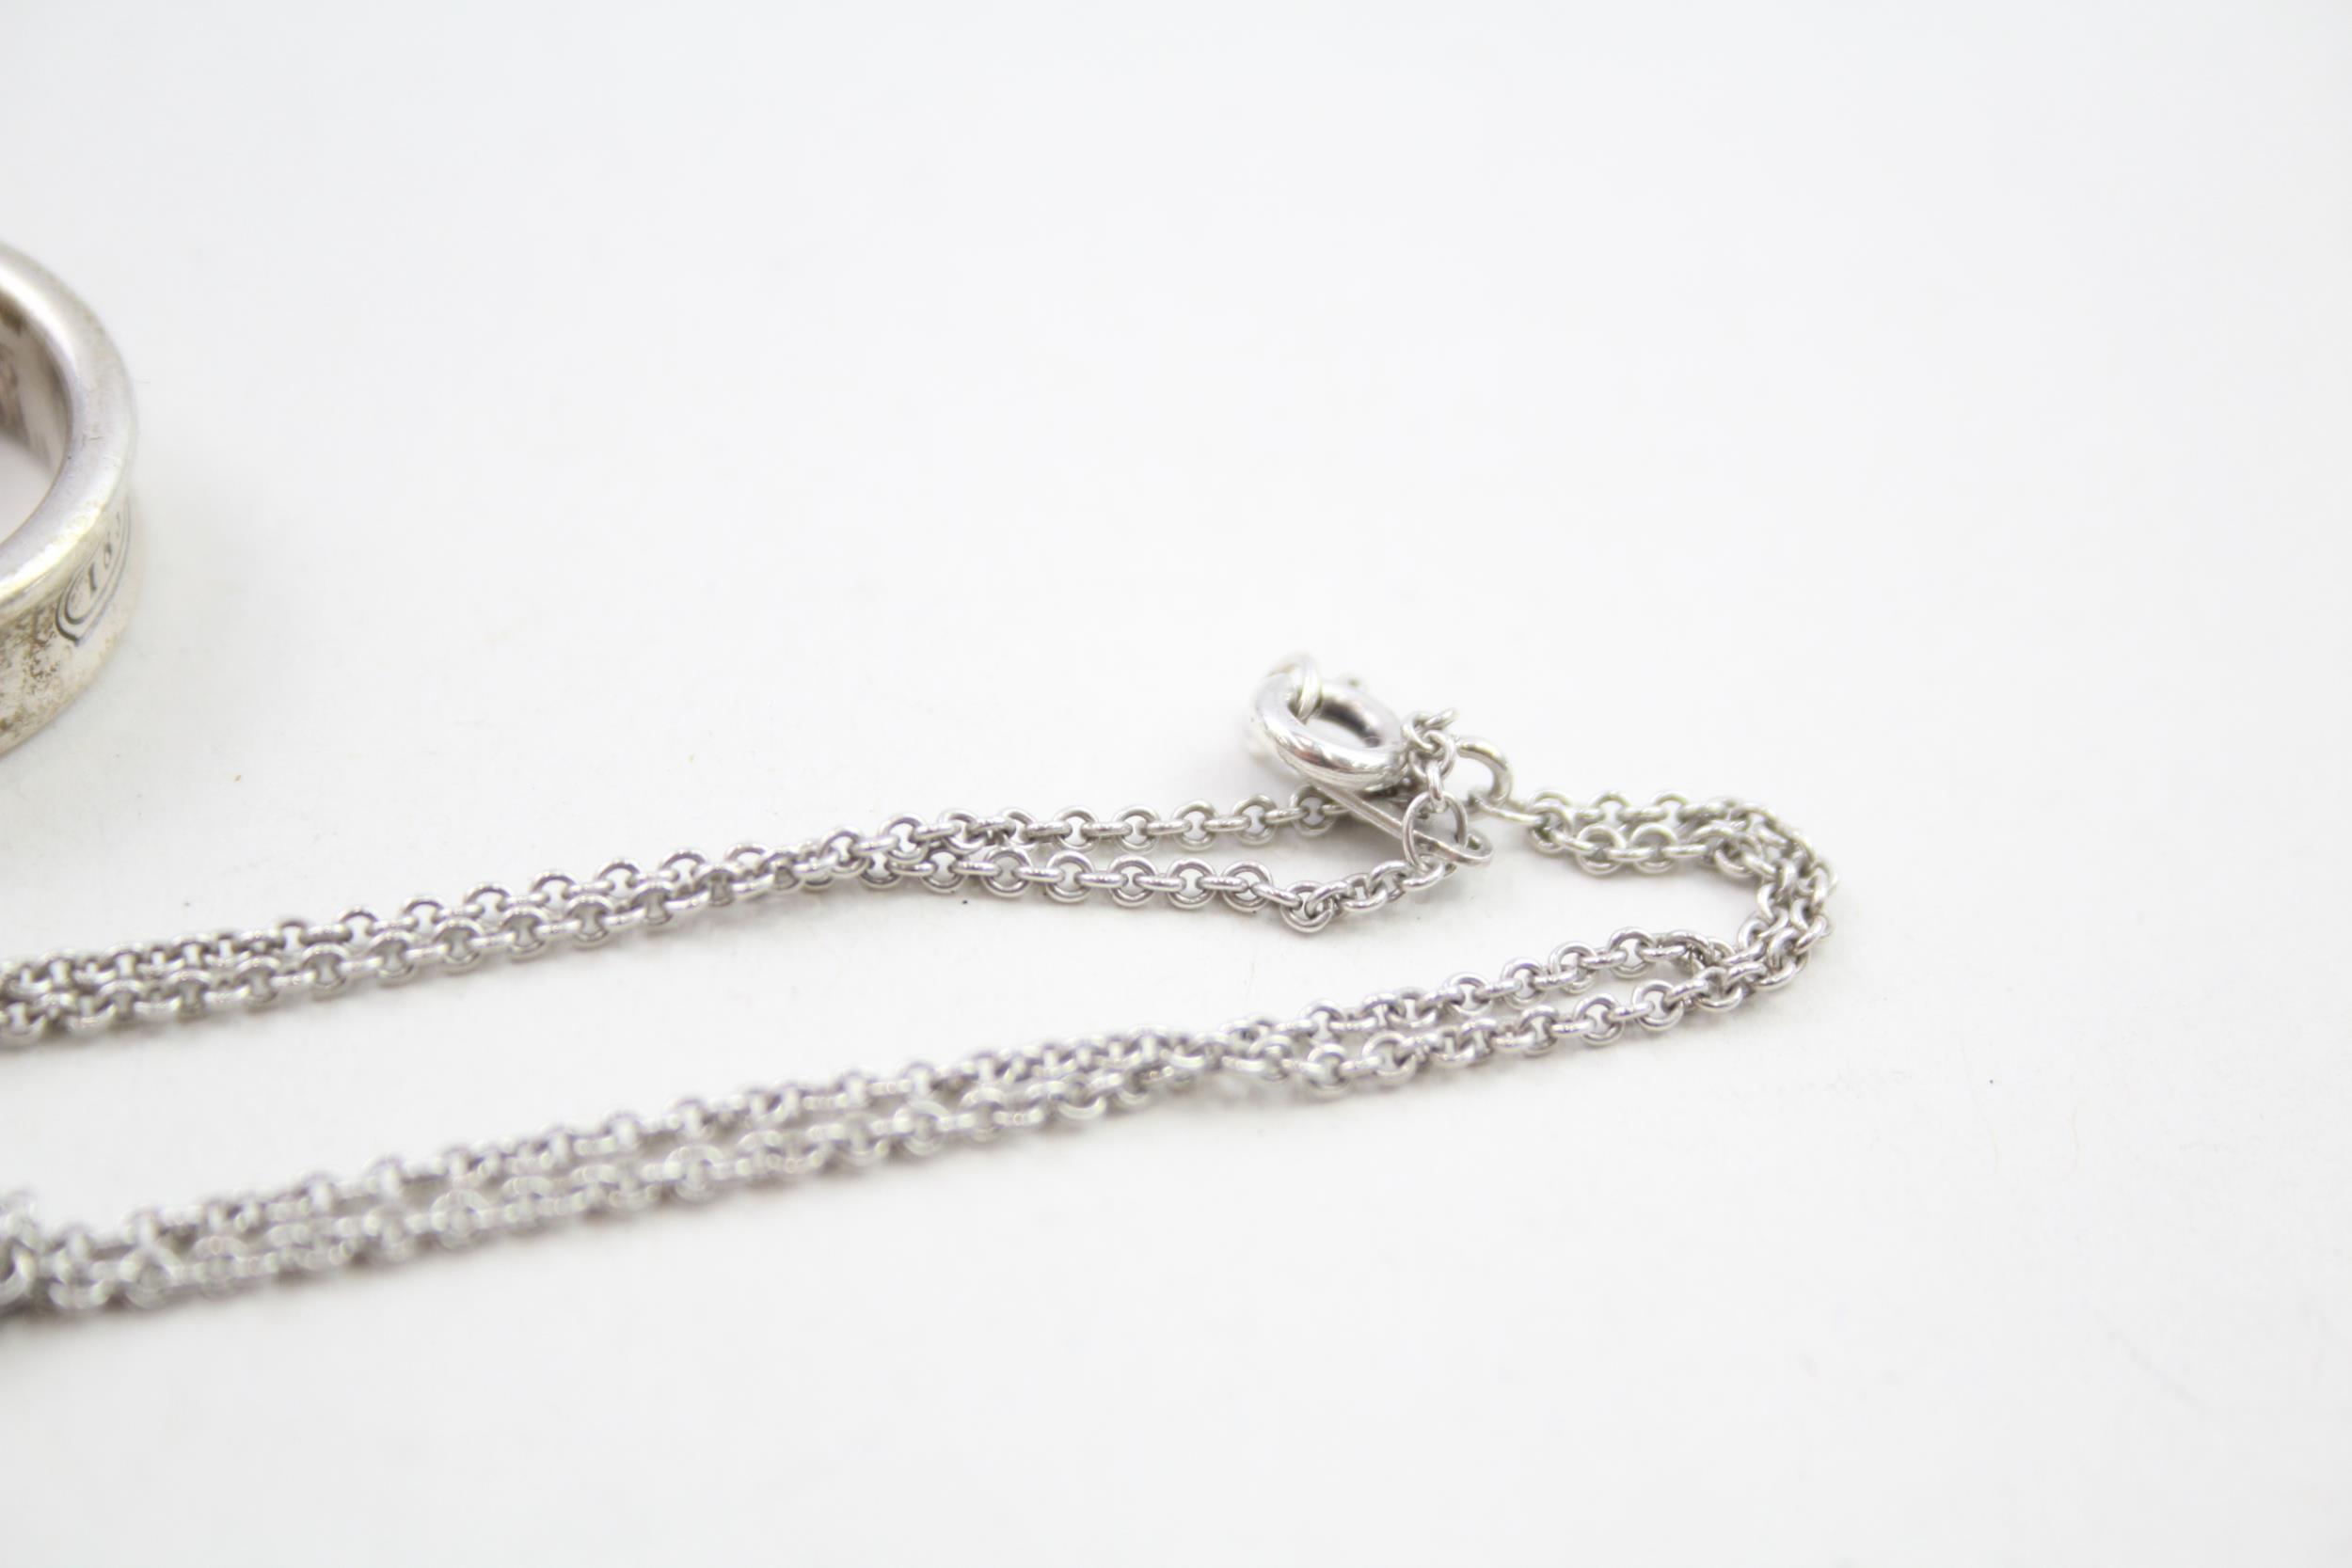 A silver bracelet, ring and pendant by Tiffany and Co (13g) - Image 6 of 6